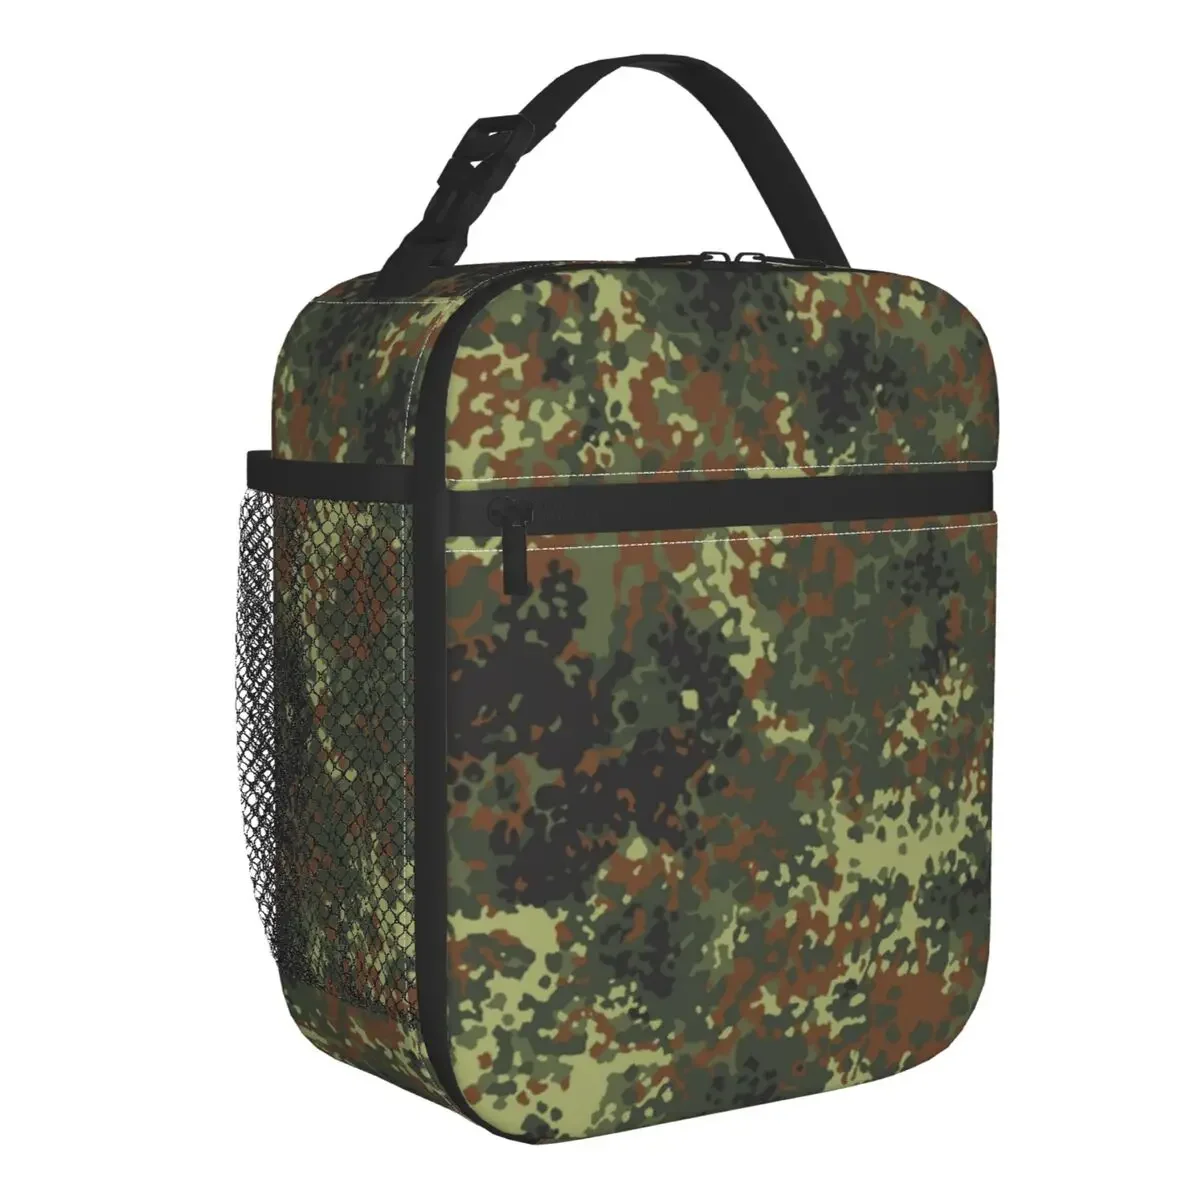 

Flecktarn Camo Resuable Lunch Box Leakproof Military Army Camouflage Thermal Cooler Food Insulated Lunch Bag School Student